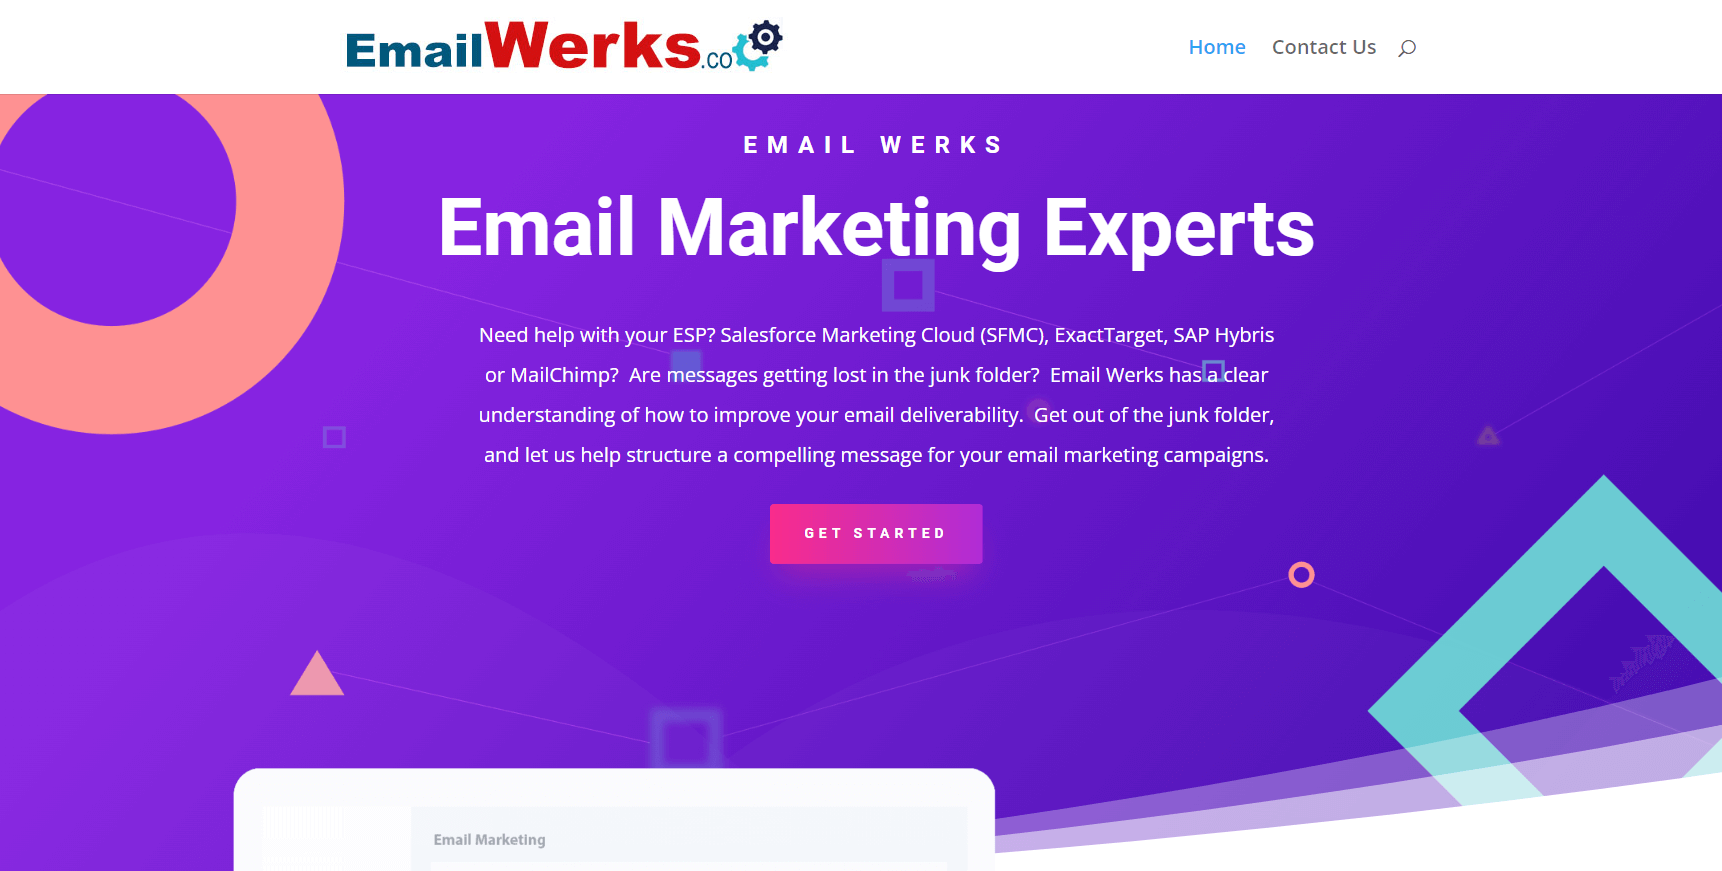 the email marketing experts website